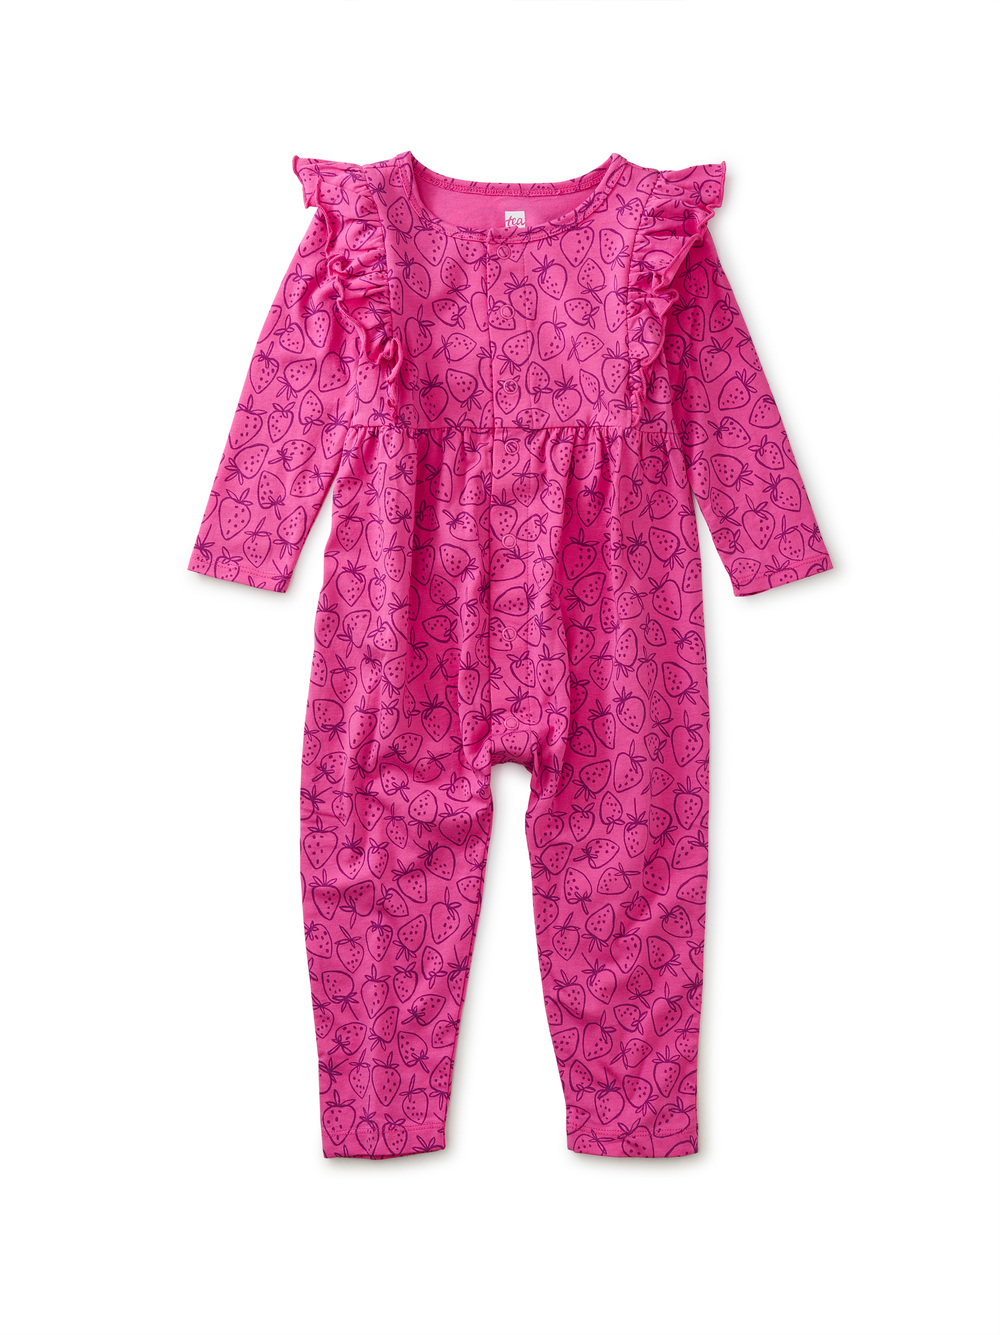 Snap Front Ruffle Baby Romper